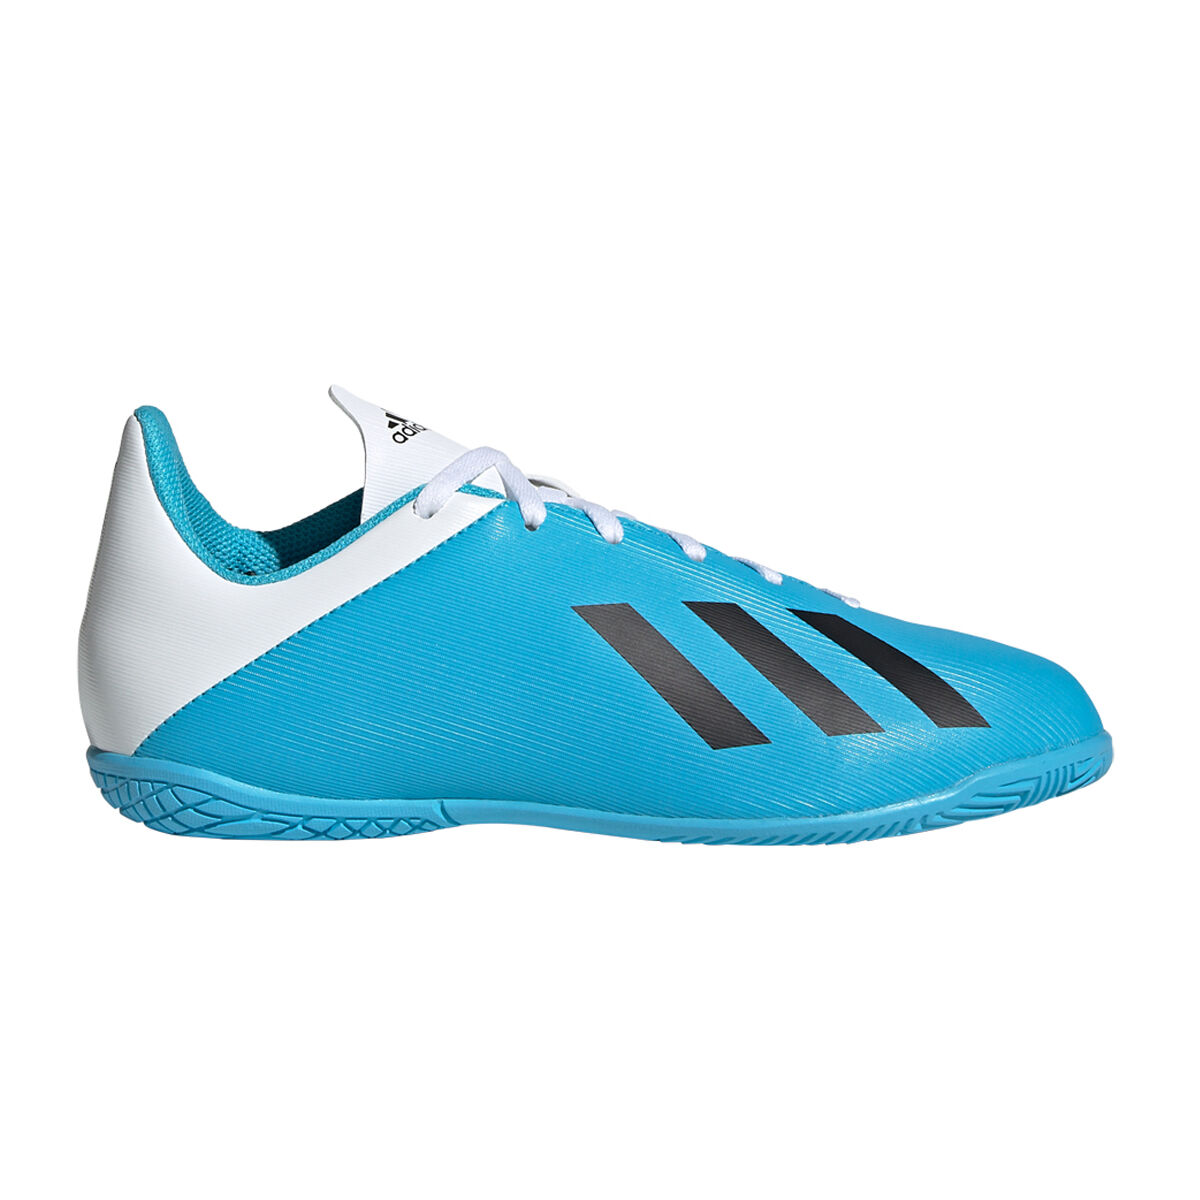 adidas football shoes for kids